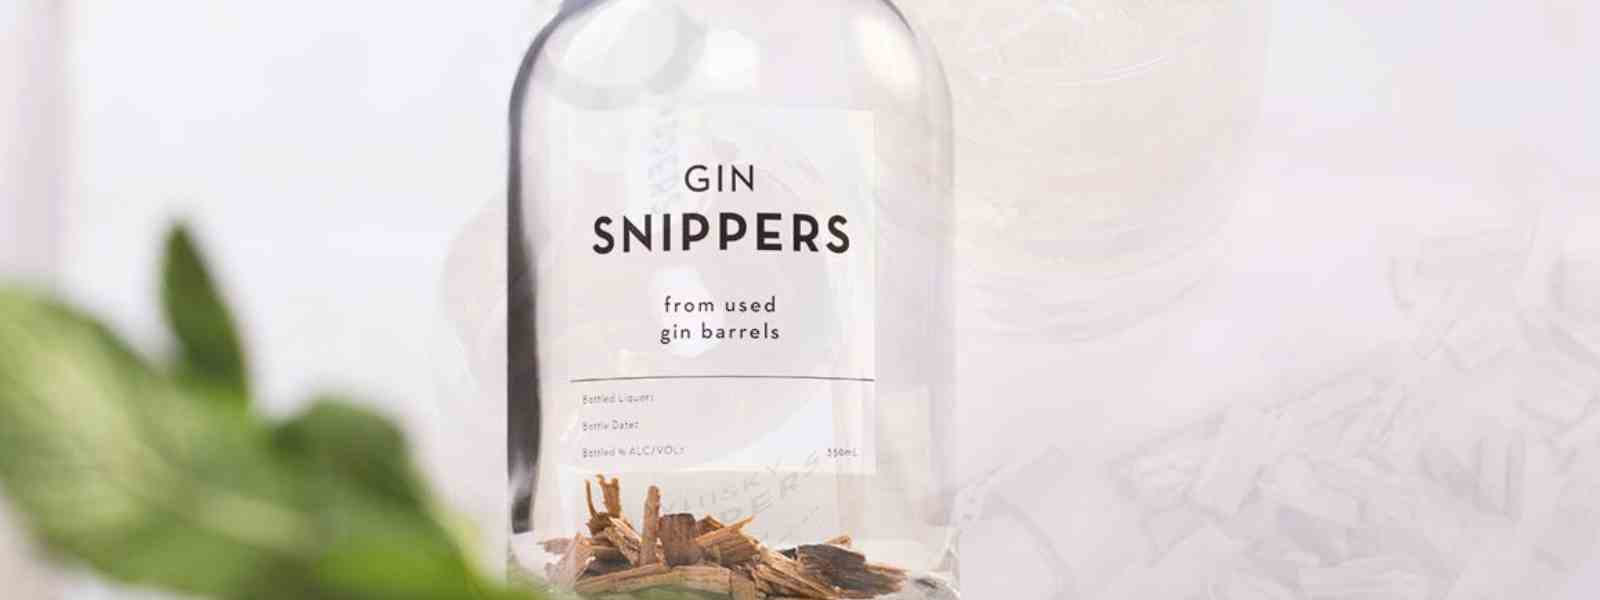 Snippers-gin